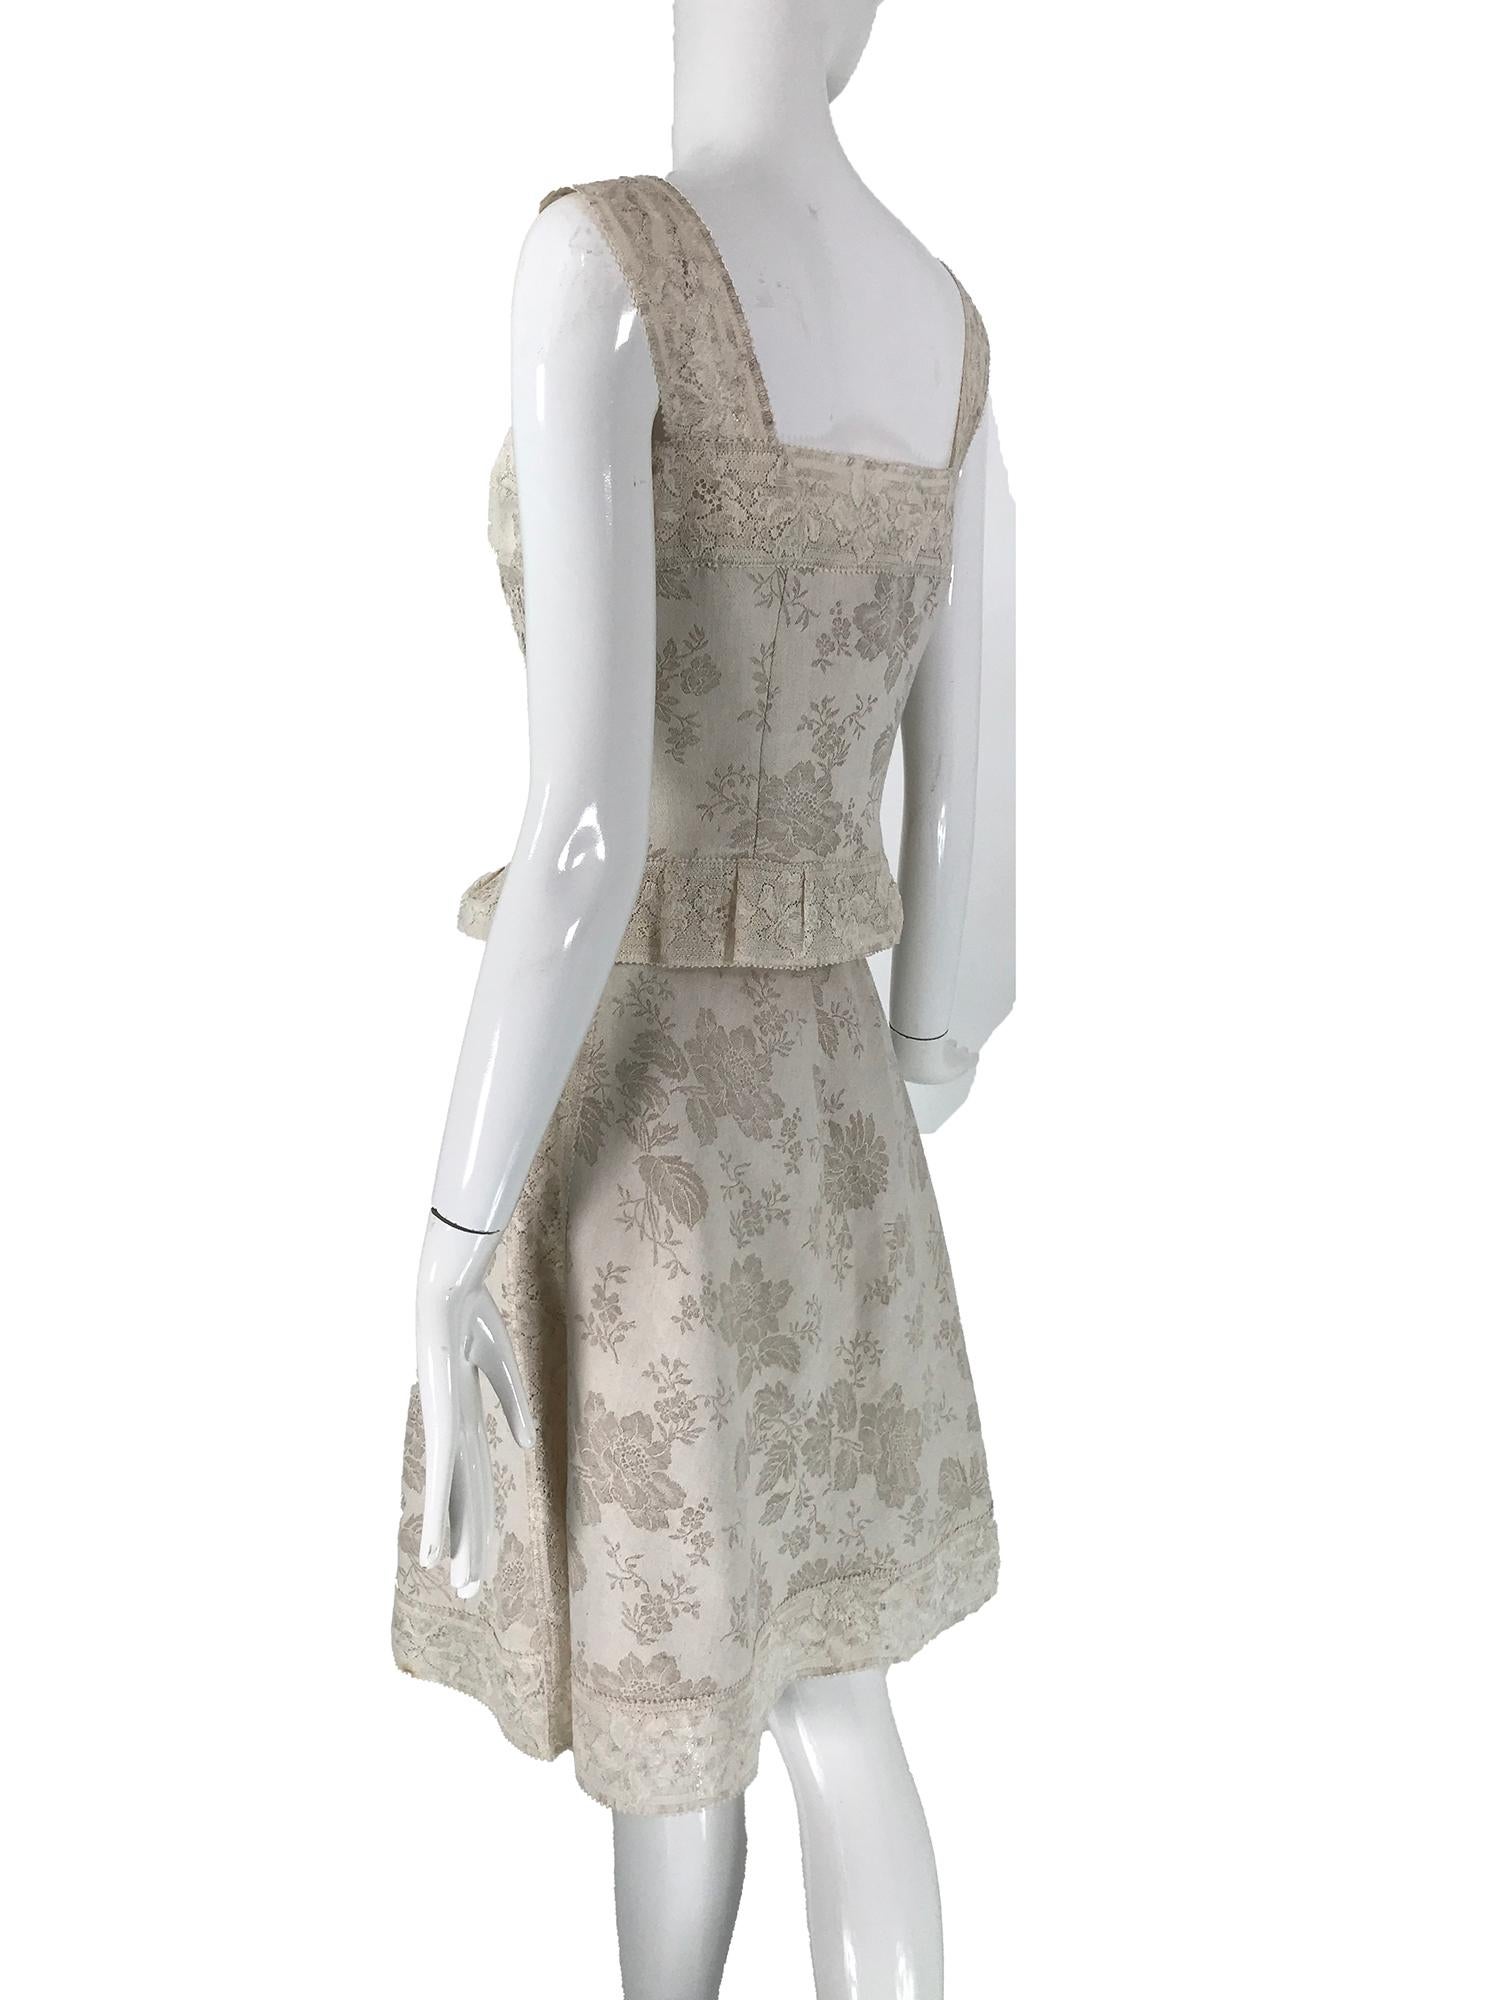 Valentino Boutique Ivory Floral Damask Linen & Lace Camisole Top & Skirt 1980s 1